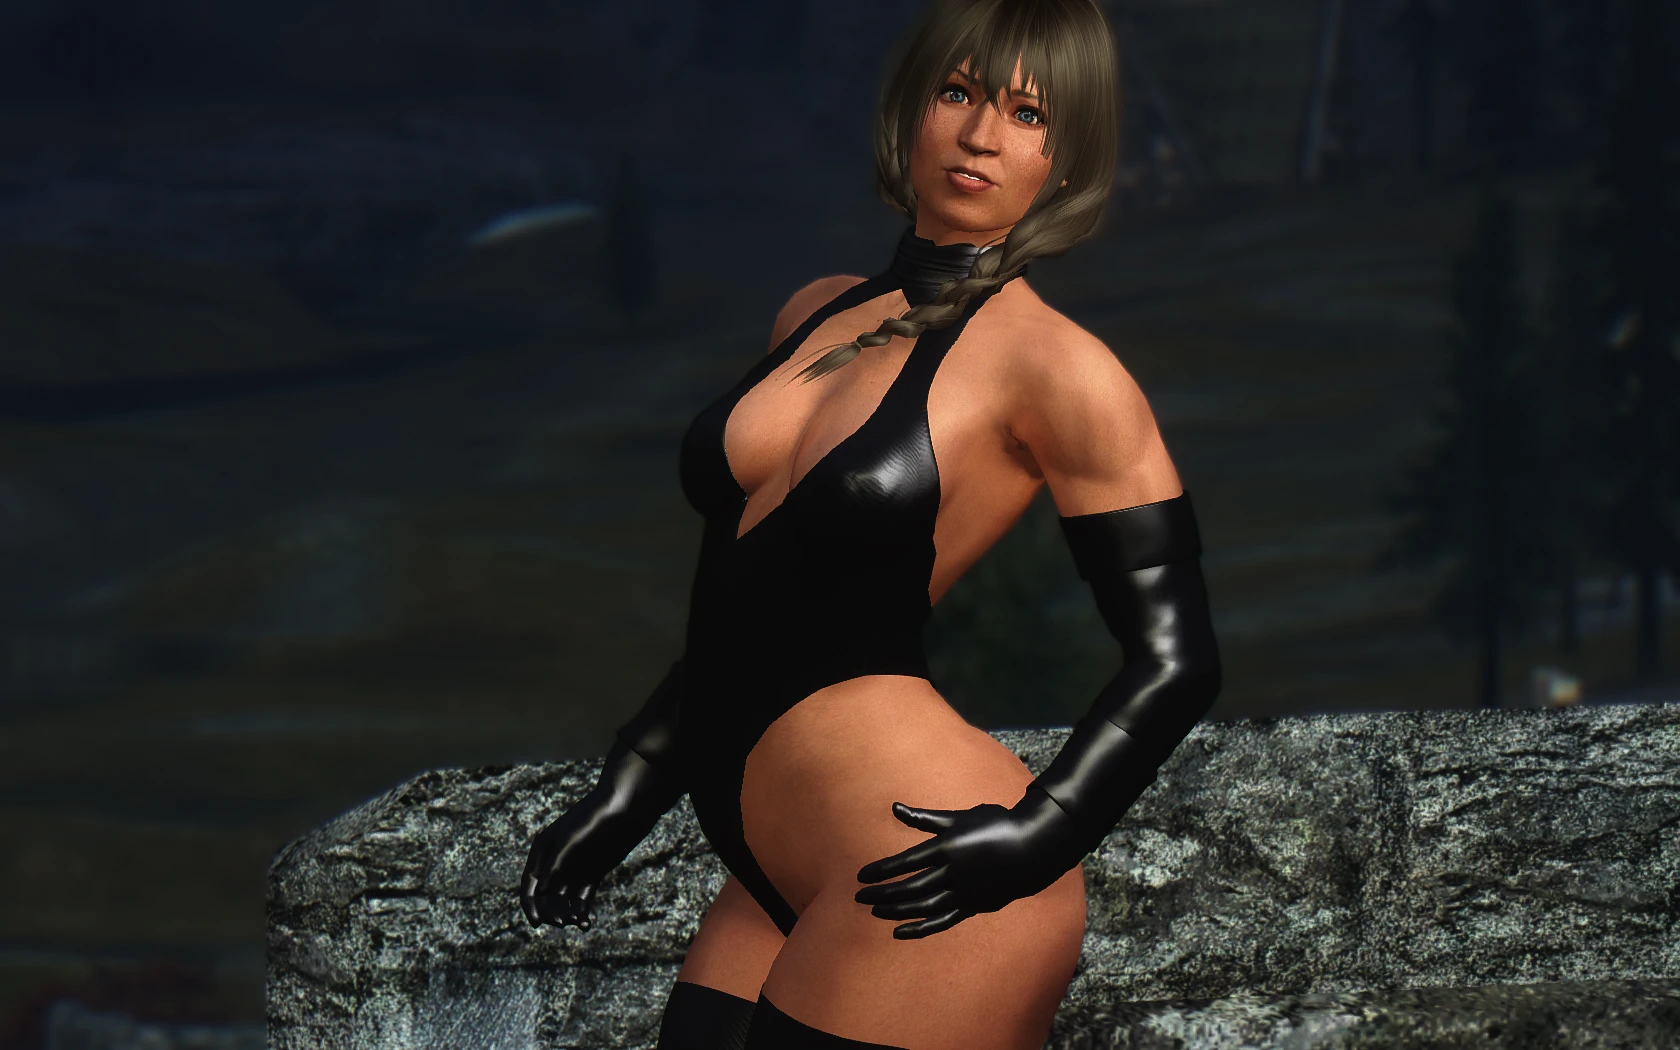 Skimpy Assassin Outfit.